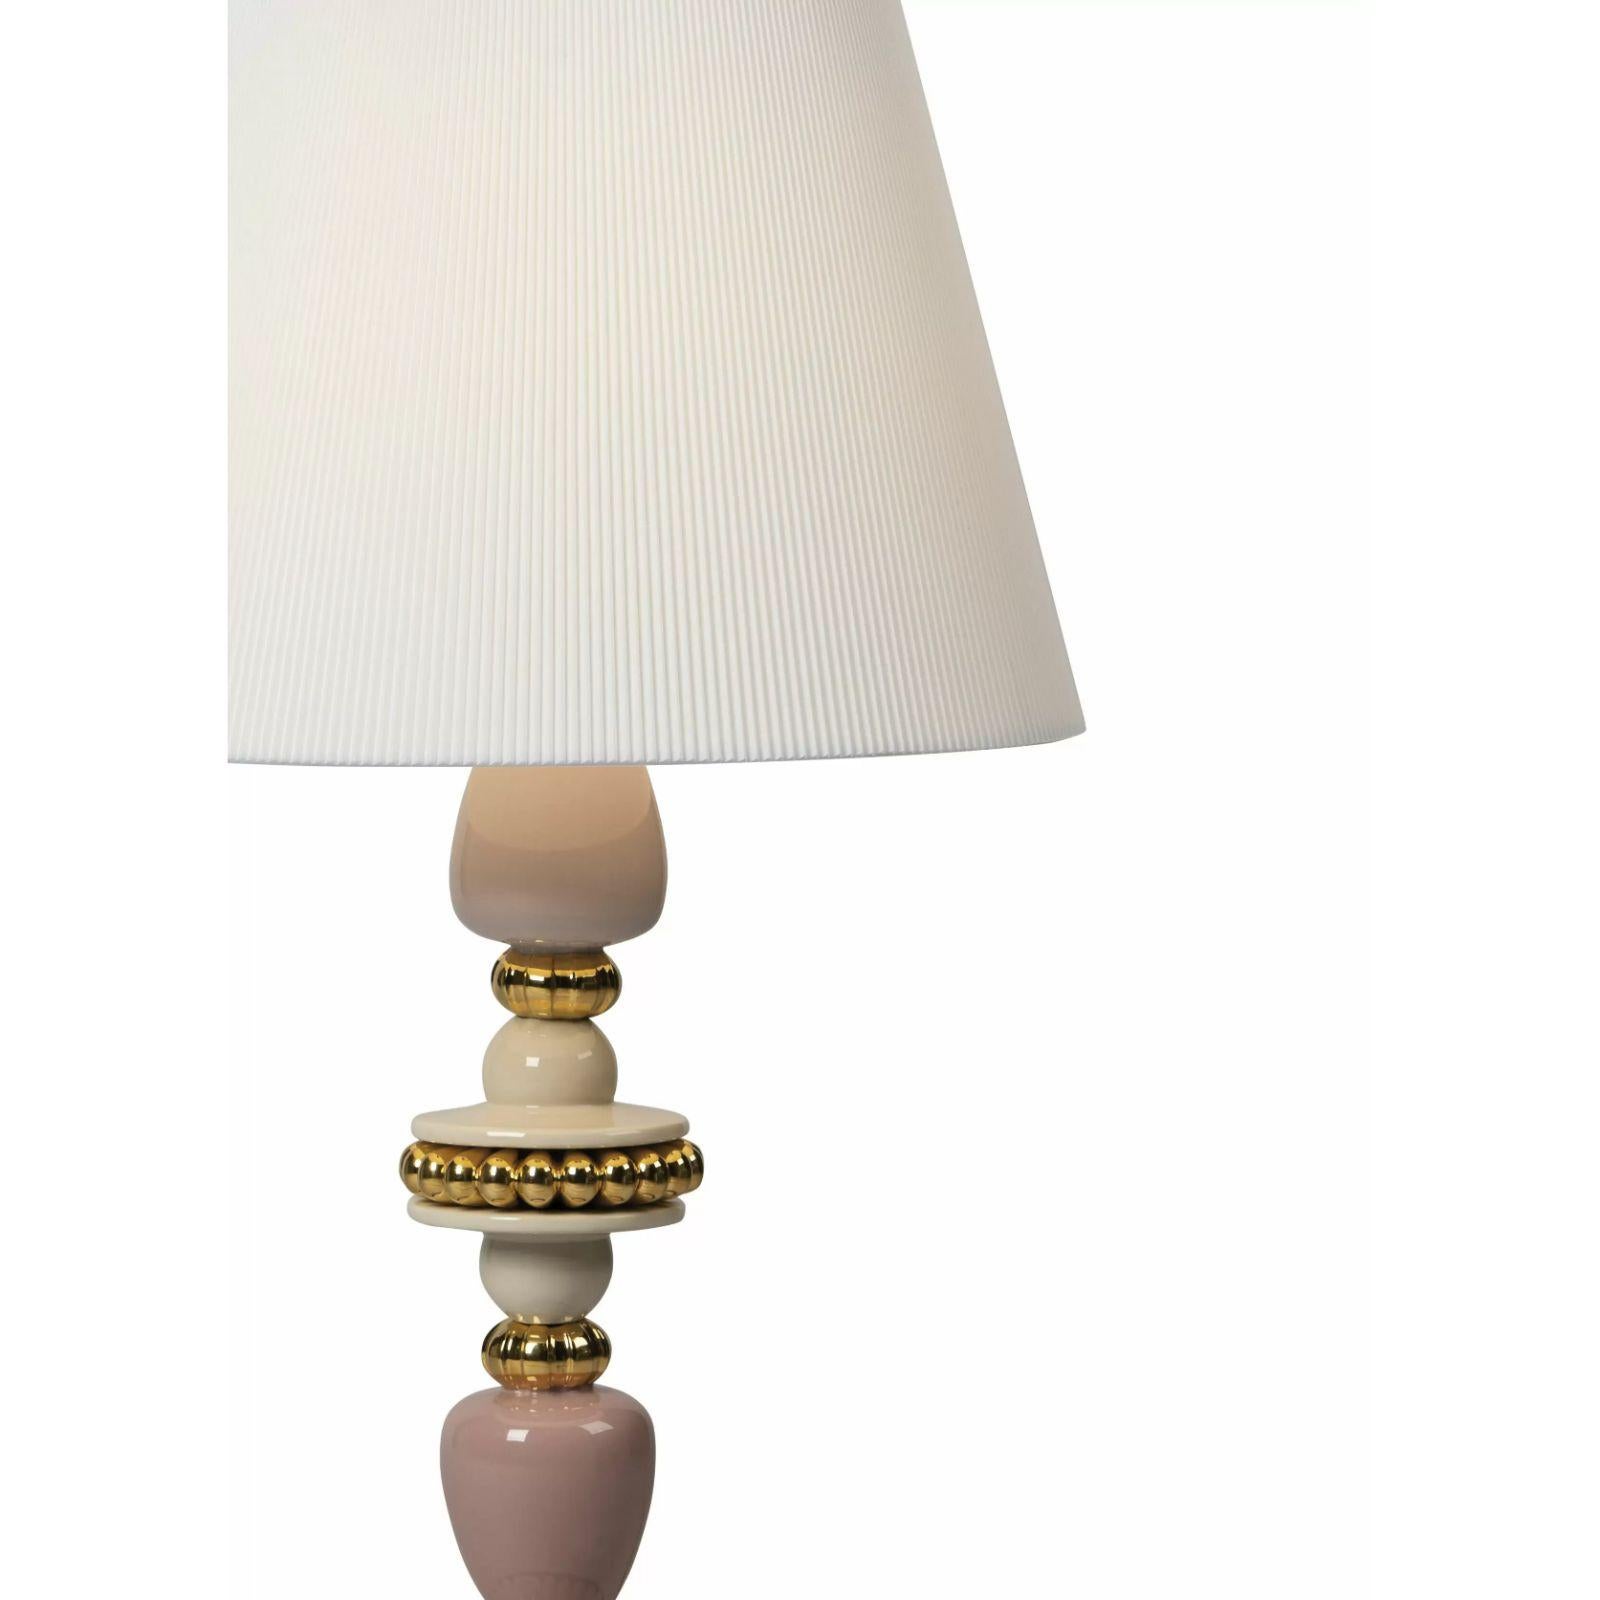 Table lamp in porcelain from the Firefly collection, inspired by the fascinating light emitted by fireflies on warm summer nights. This is how this series of original lighting designs based on plant motifs came about.

A piece of glazed porcelain,